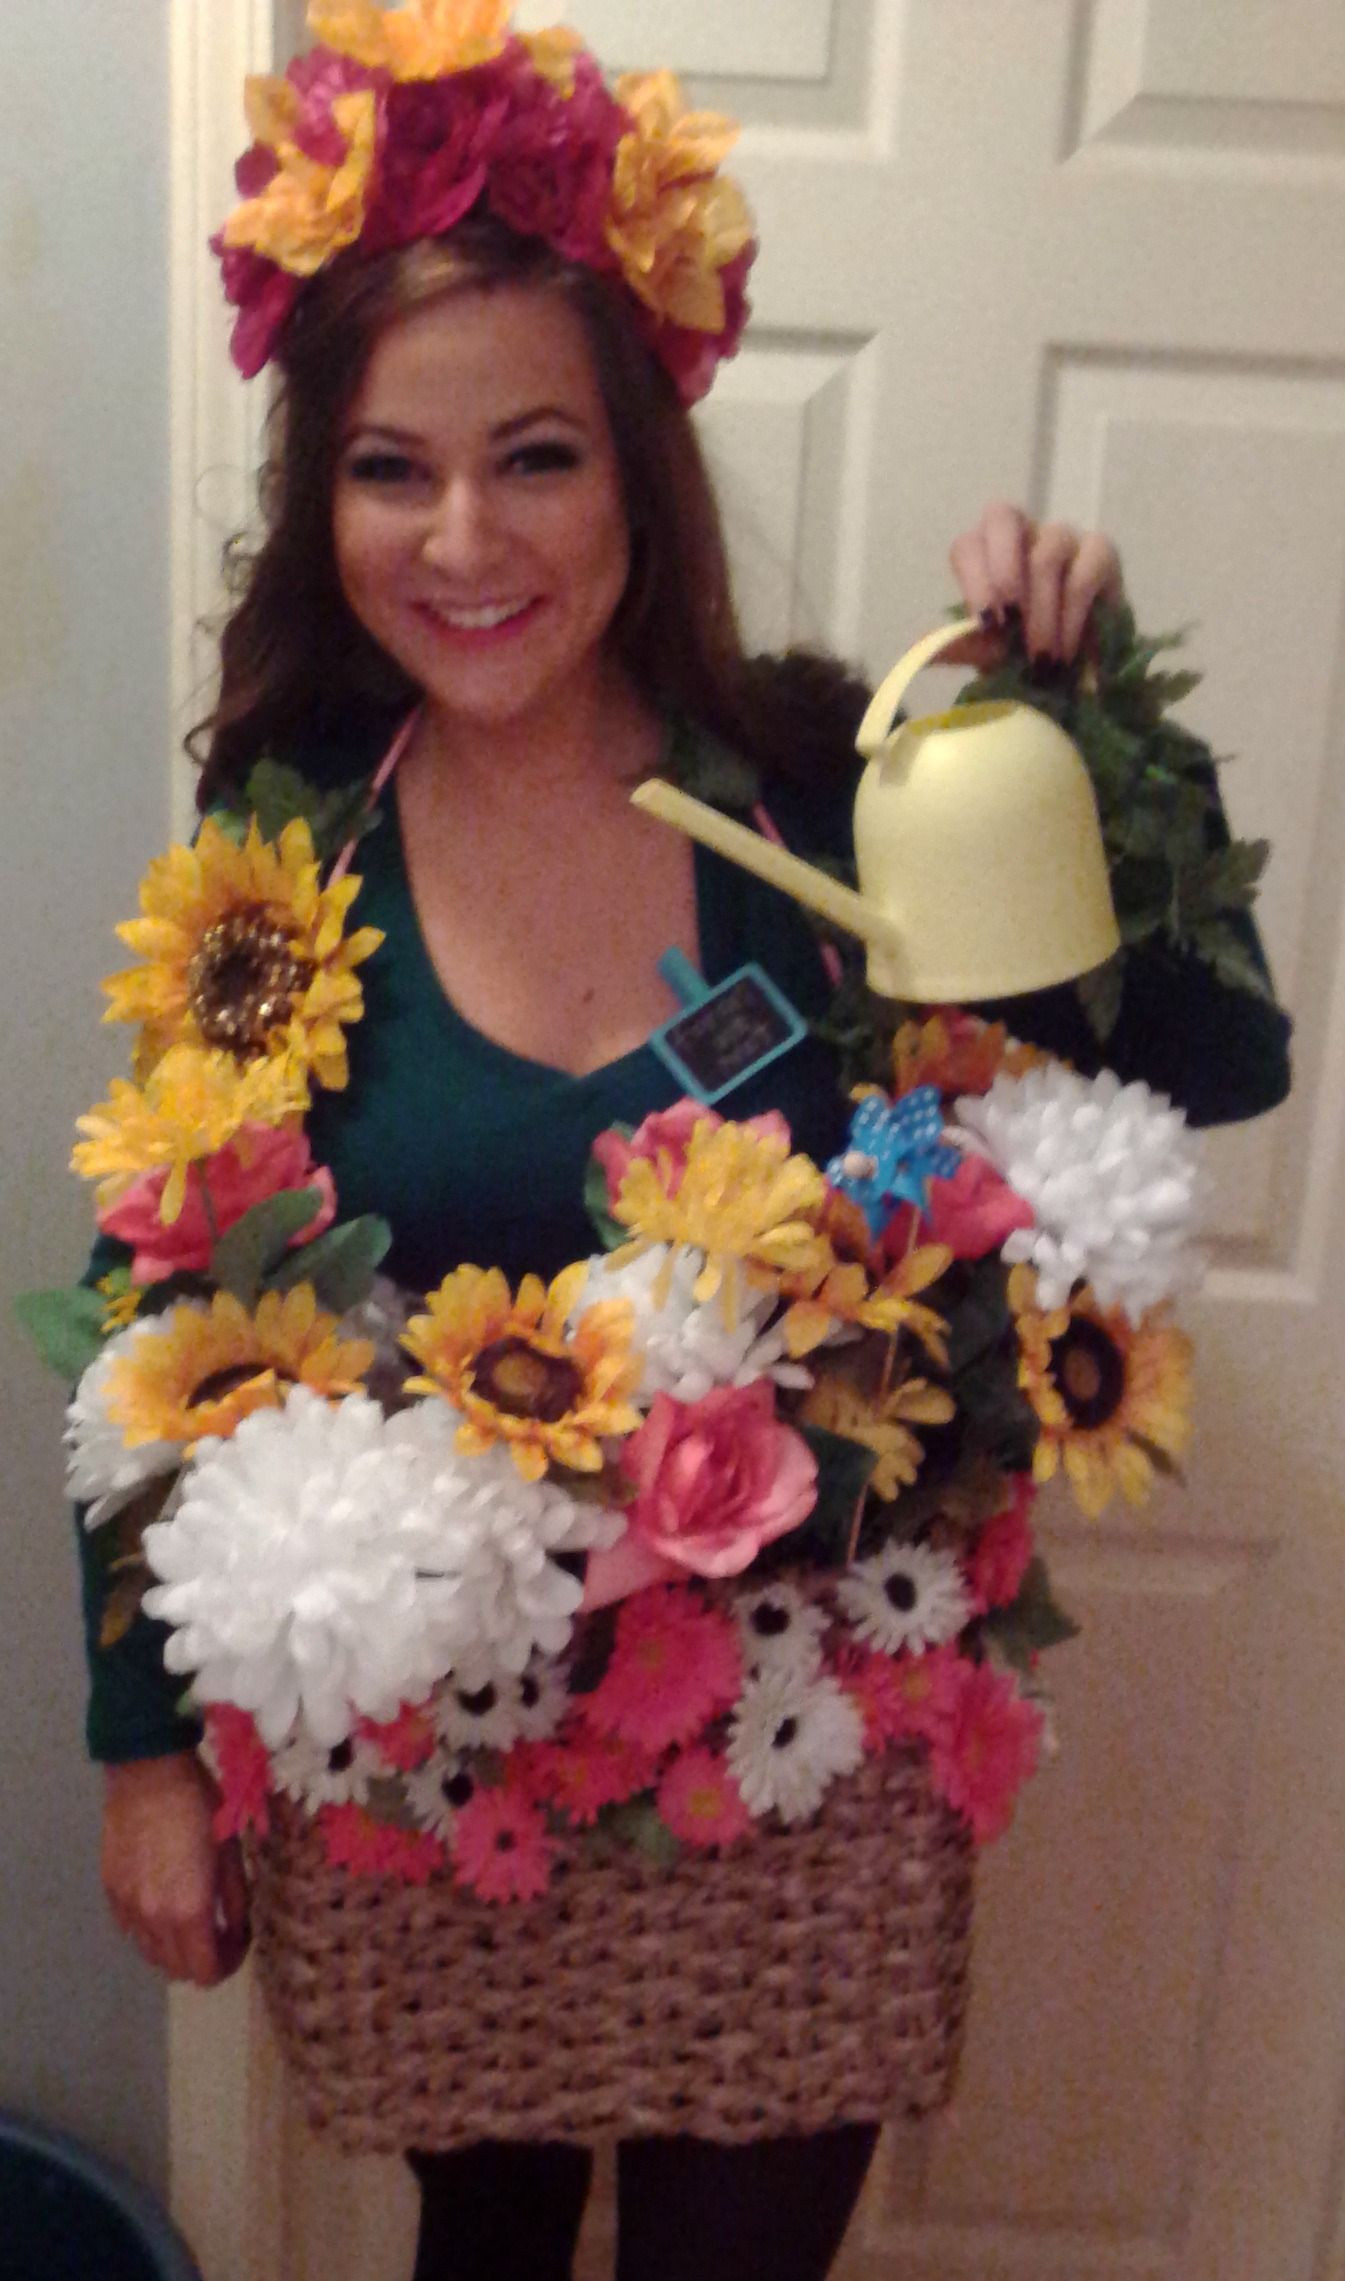 Flower Halloween Costume For Adults
 homemade Flower pot halloween costume Used the watering